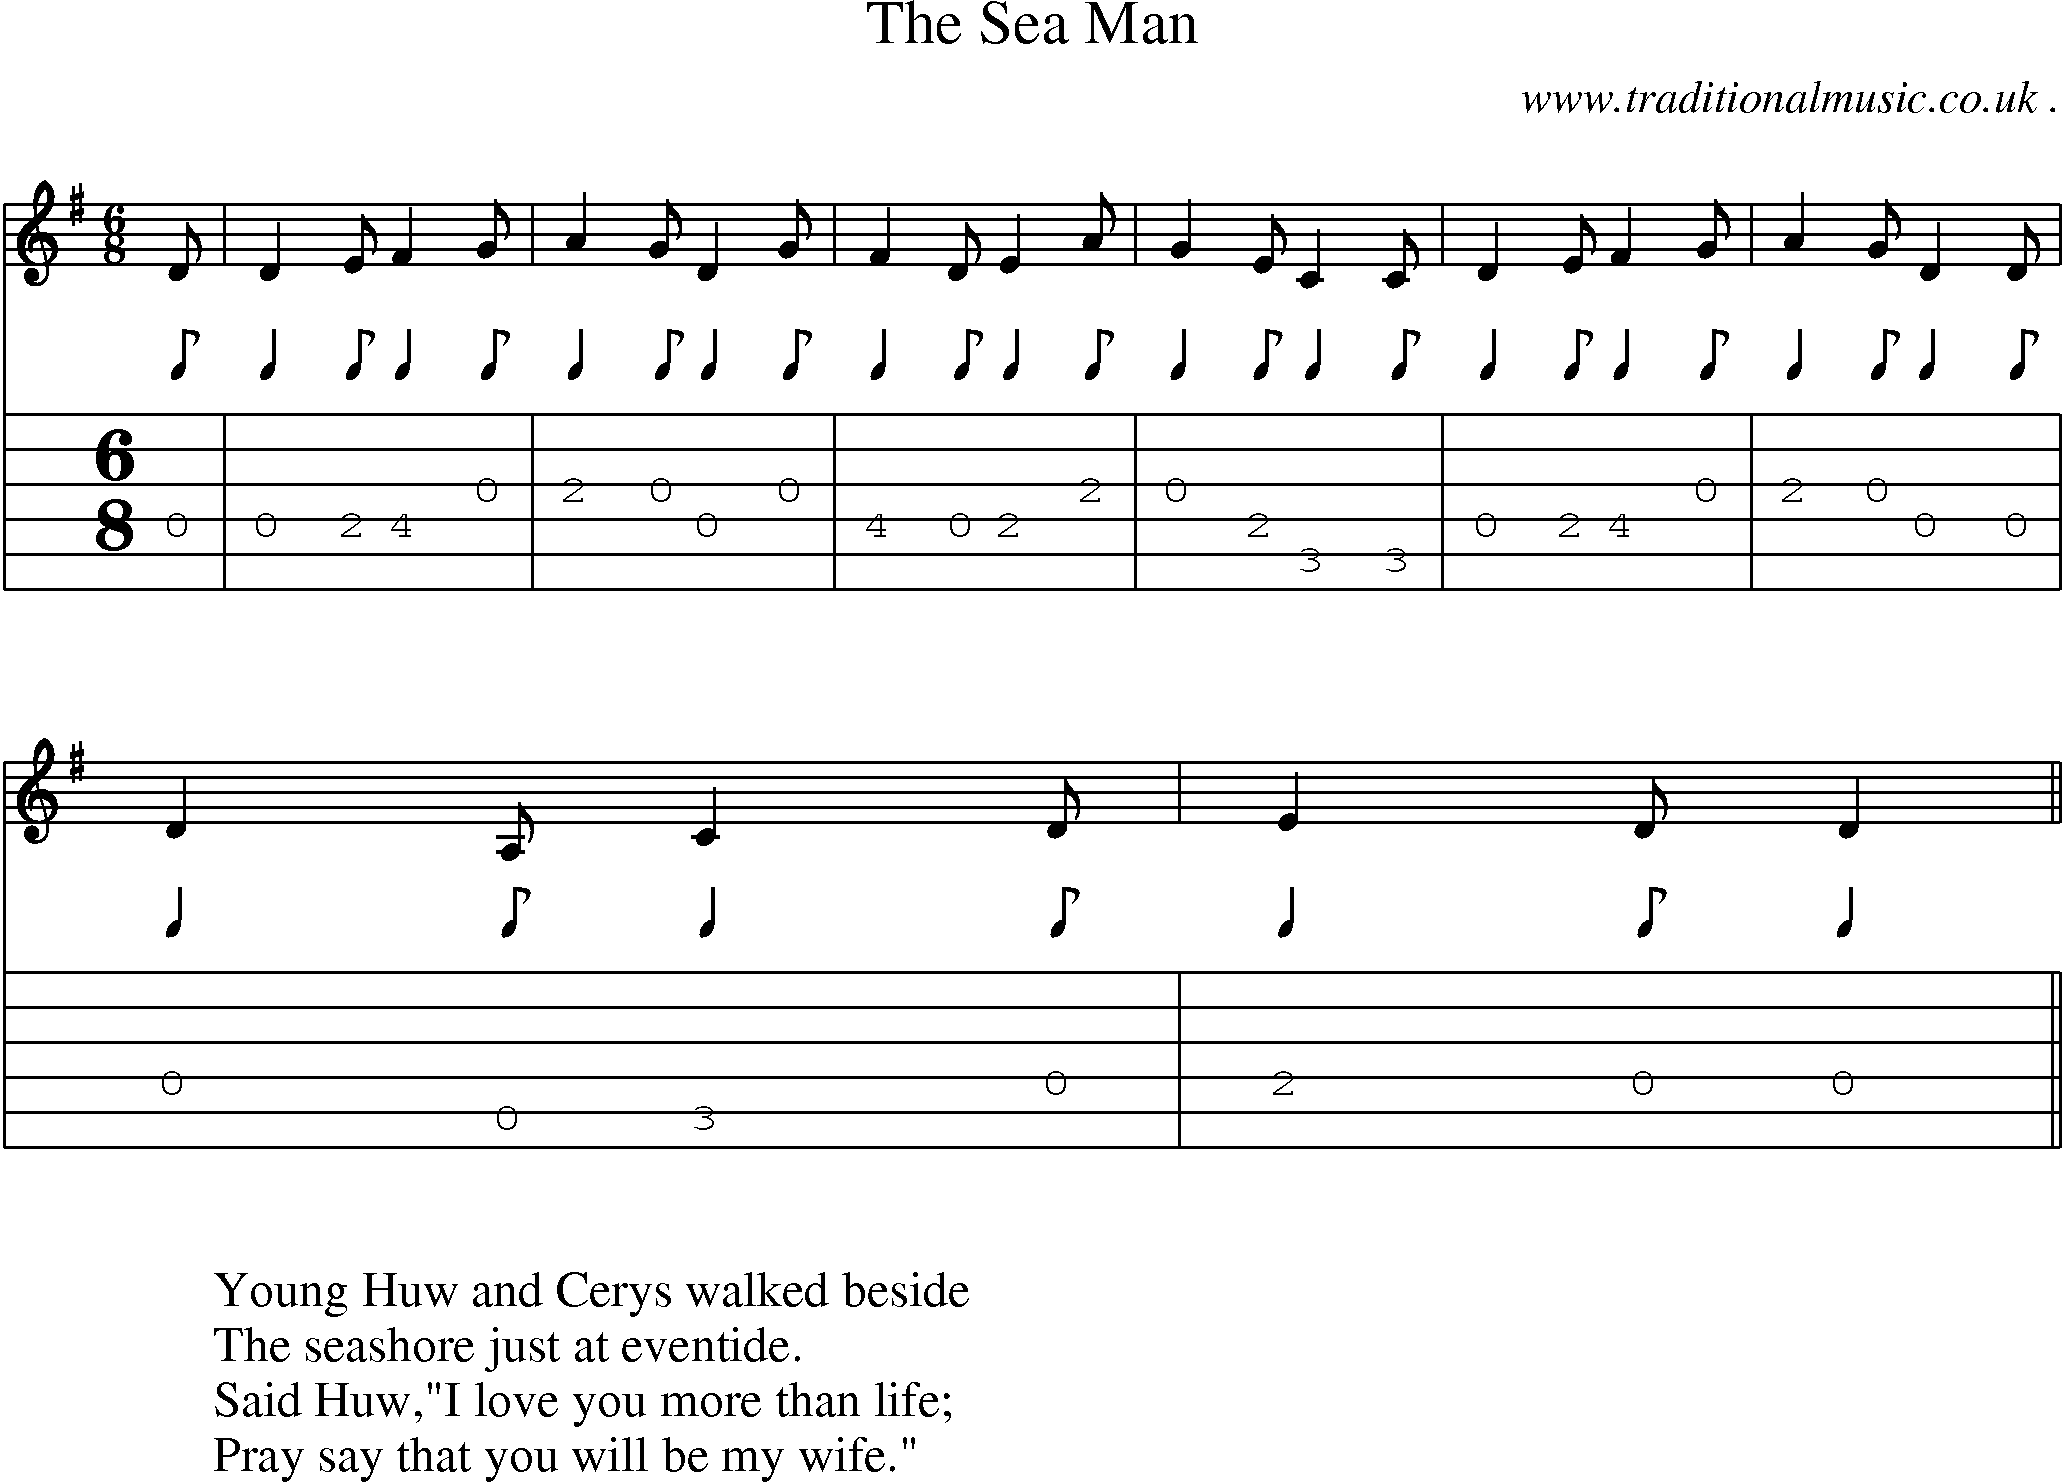 Sheet-Music and Guitar Tabs for The Sea Man